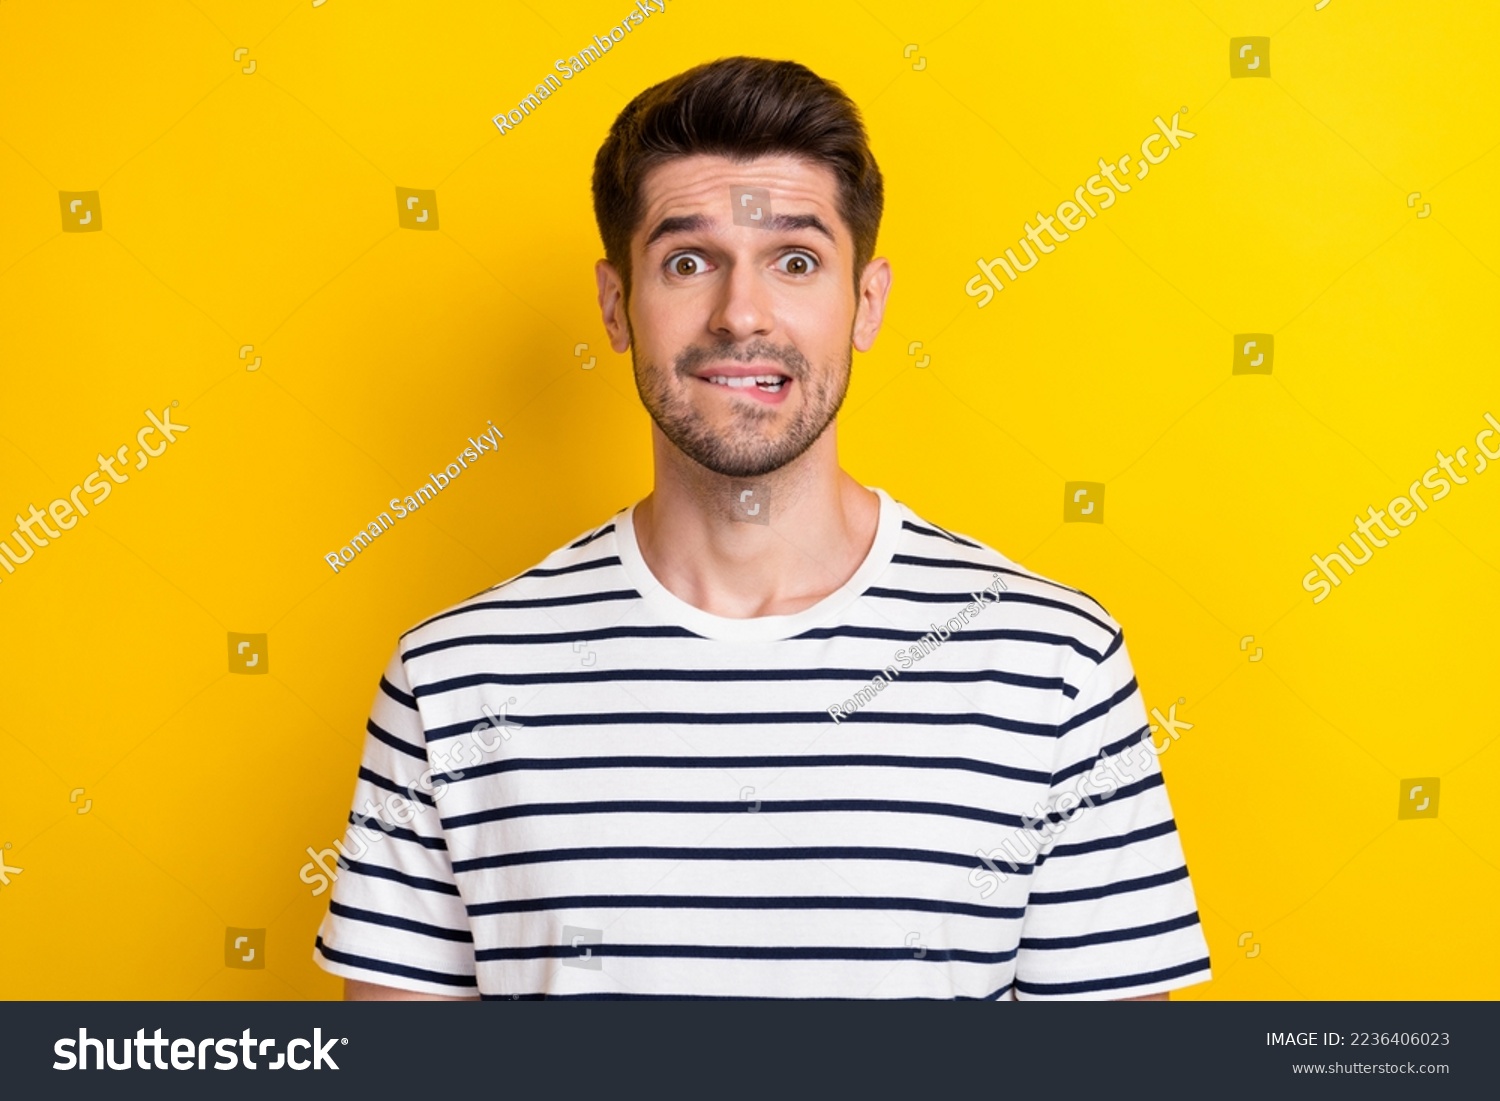 Photo of young funny grimace guy student oops mistake bite lips nervous forgot his house keys lost isolated on bright yellow color background #2236406023